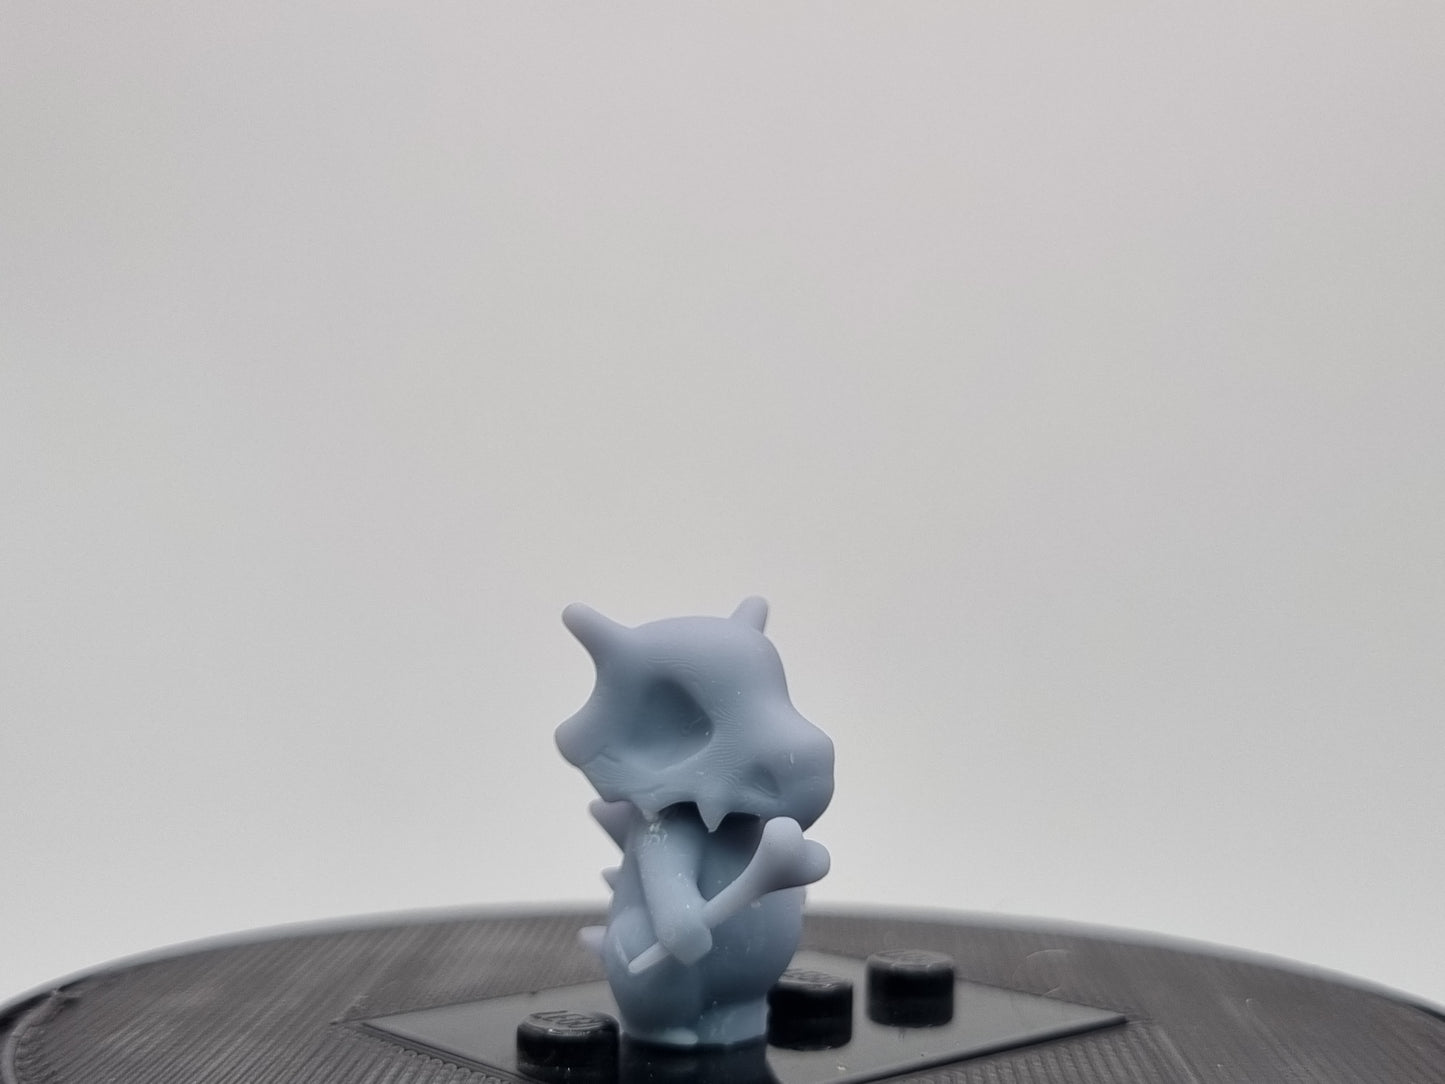 lego compatible 3D printed animal with skull on his head!